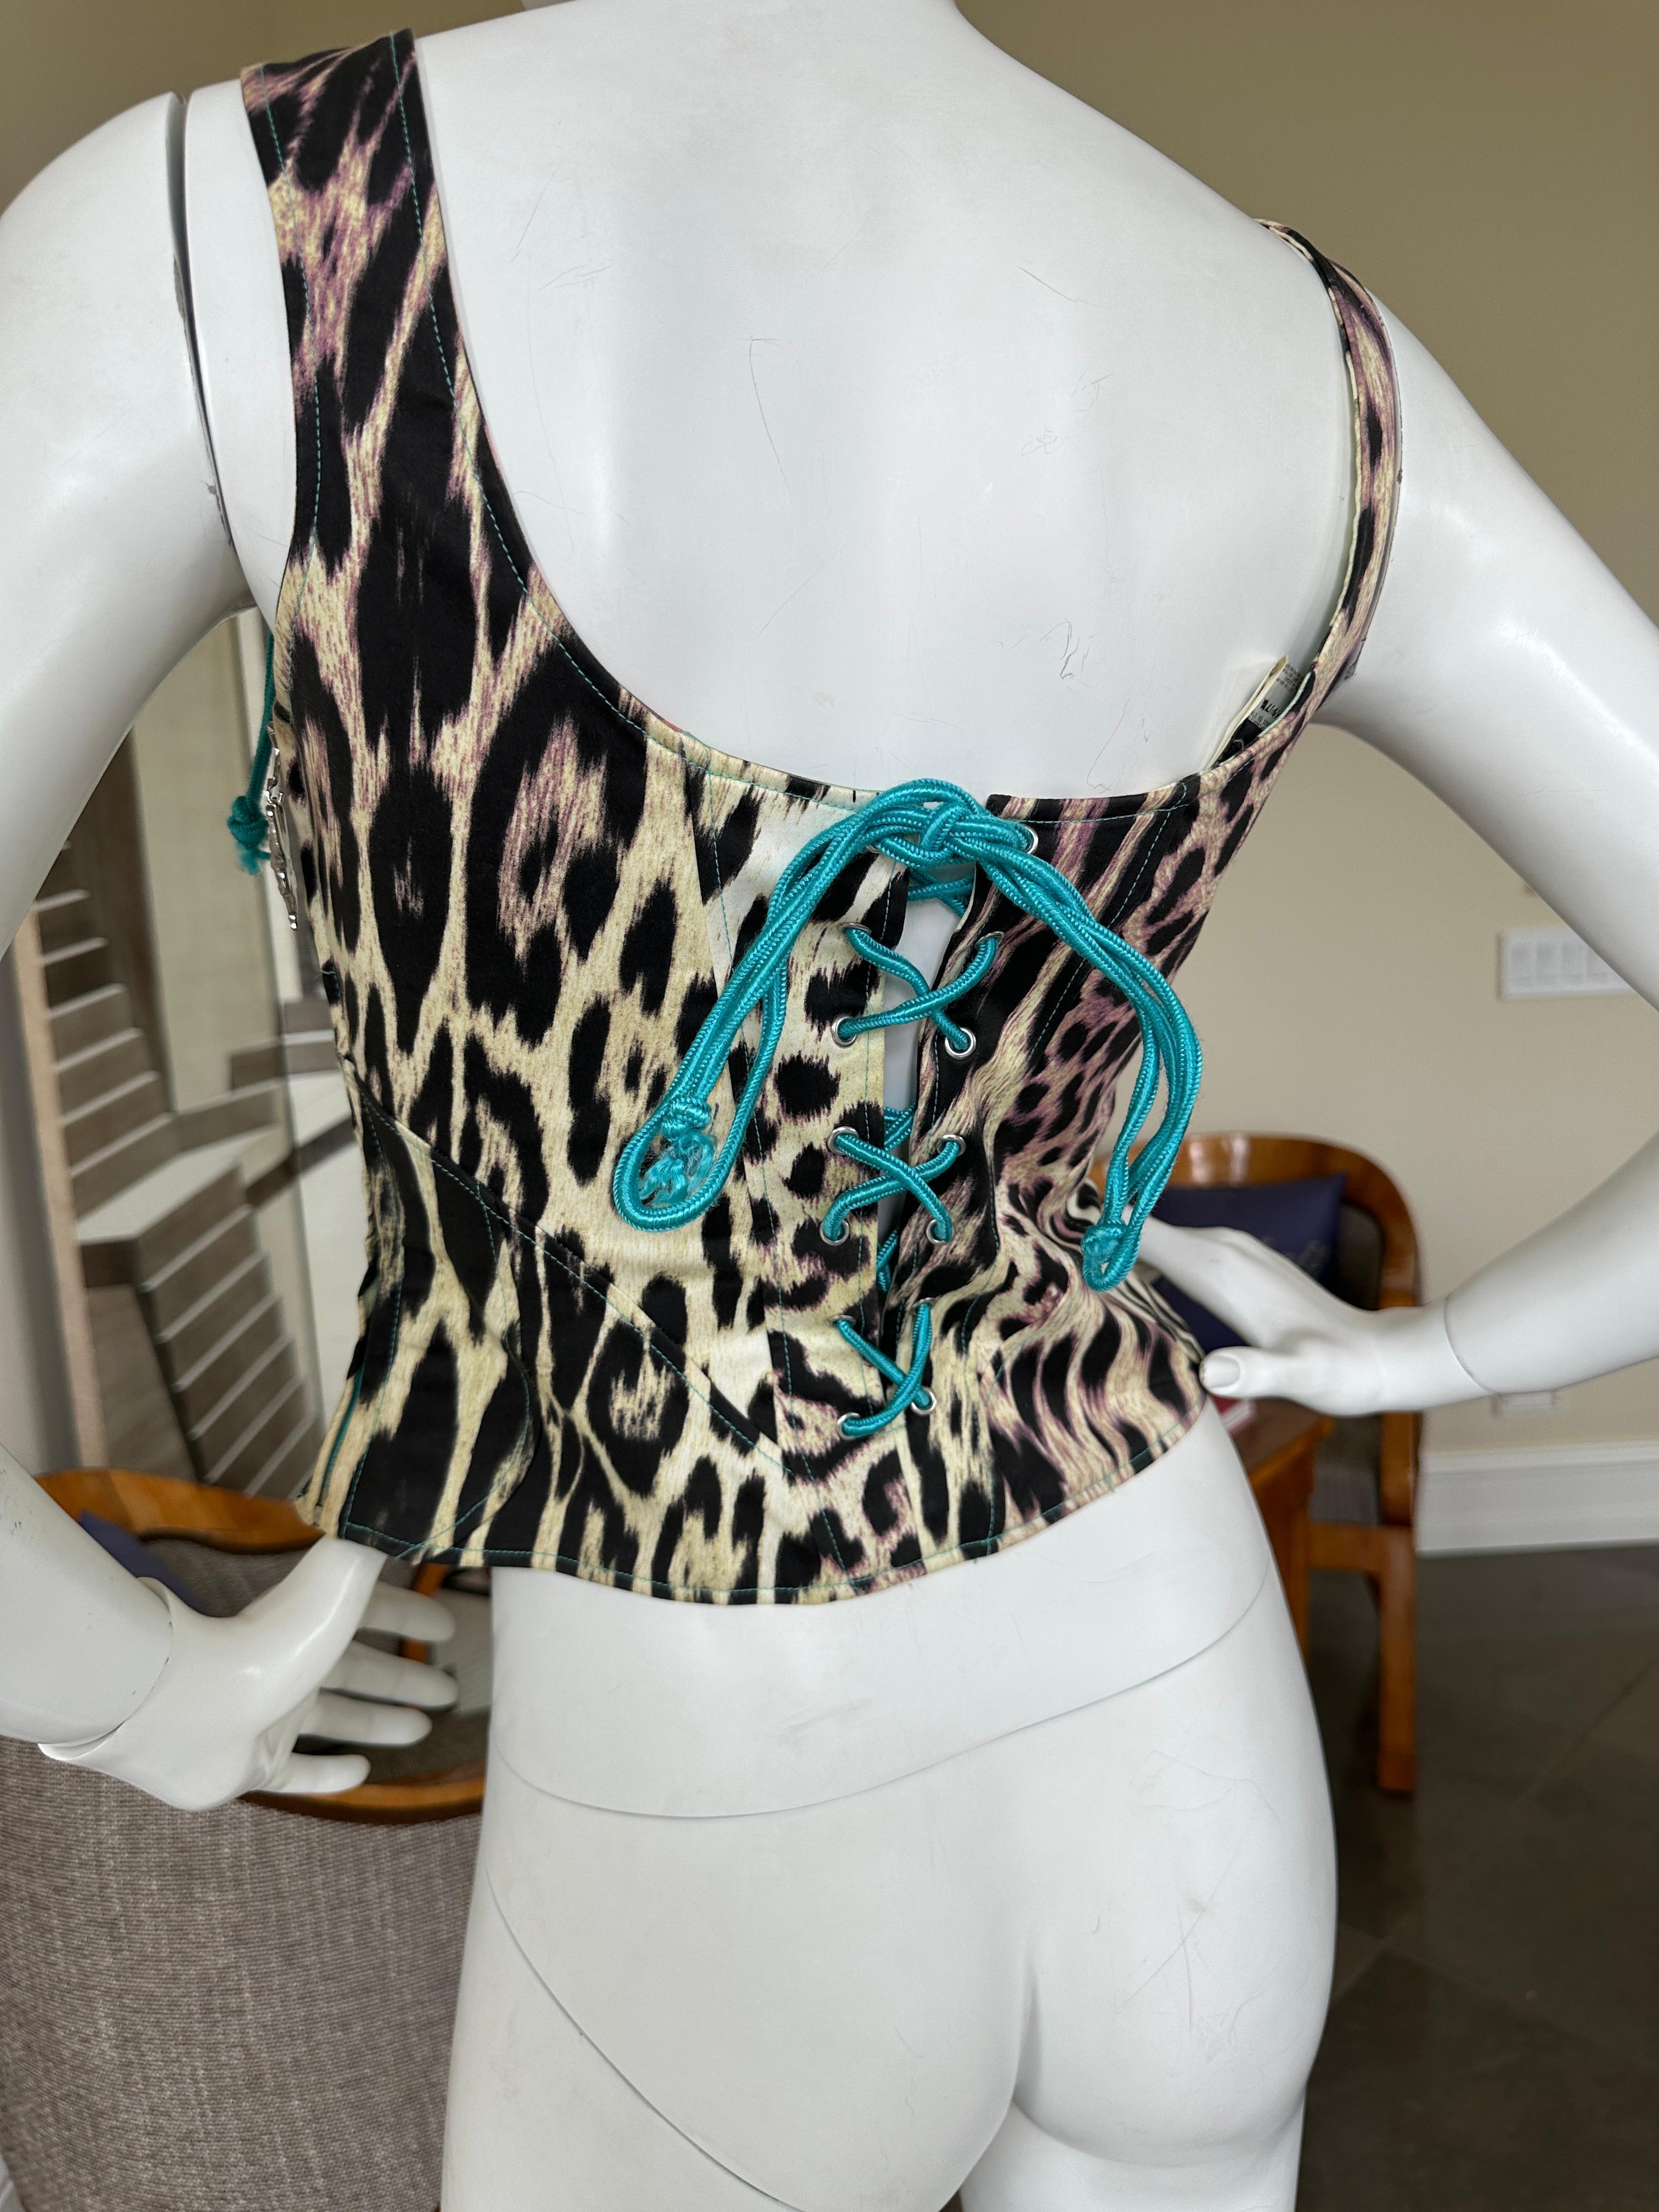 Roberto Cavalli for Just Cavalli Zebra Print Corset with Lace Up Details  For Sale 5